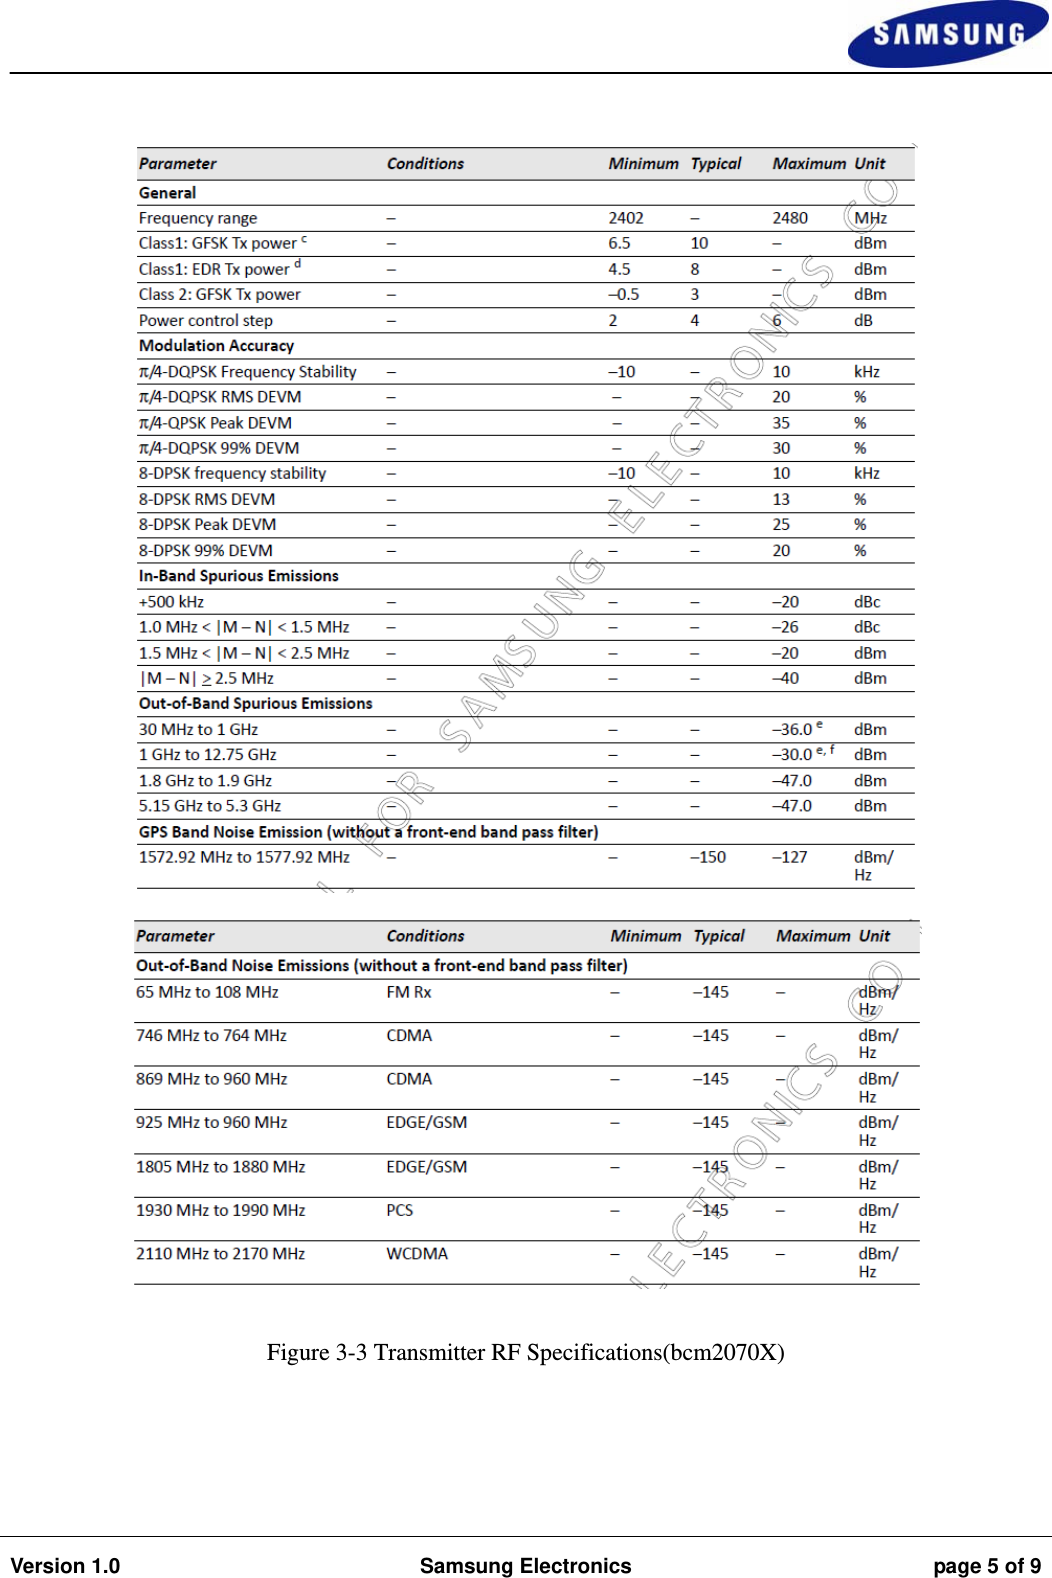                                                                                                                                                                    Version 1.0  Samsung Electronics  page 5 of 9       Figure 3-3 Transmitter RF Specifications(bcm2070X) 